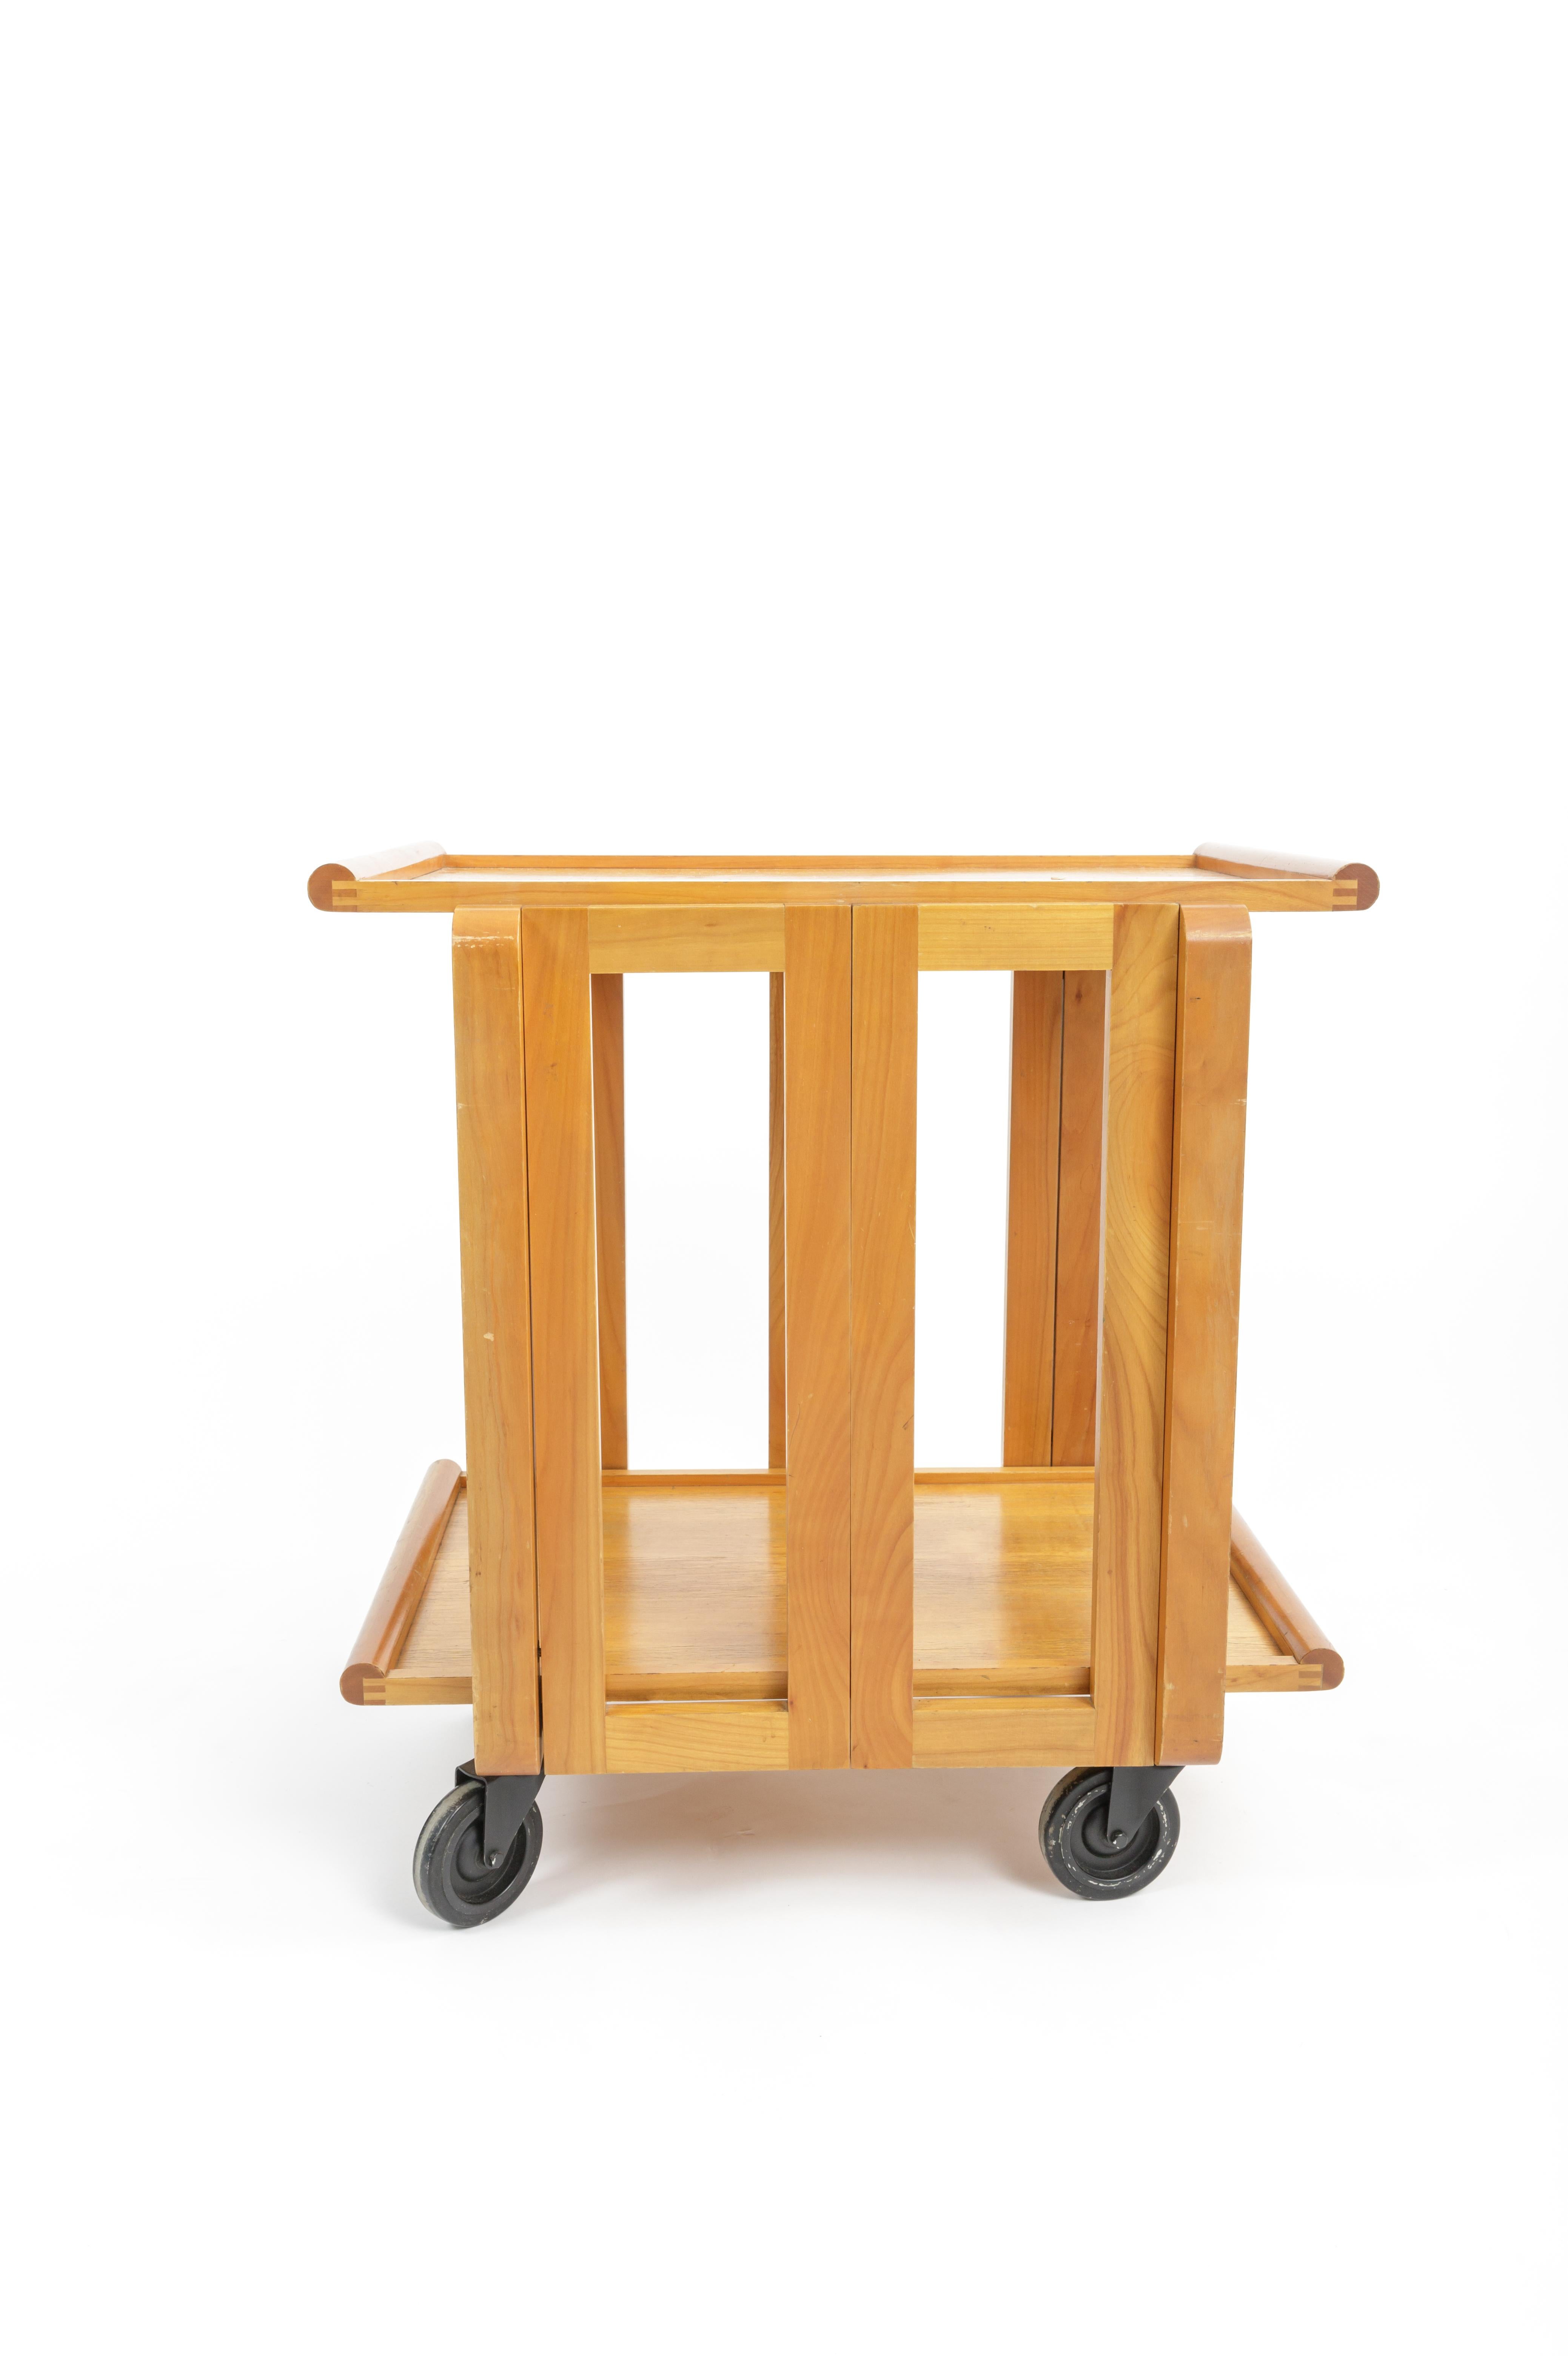 Carl Auböck III folding wooden tea trolley, Austria, circa 1980s 

Originally designed for the Culinar Ostovics, this tea trolley consists of two serving trays that allow the cart to fold flat for storage when removed. 

Sits on enameled steel